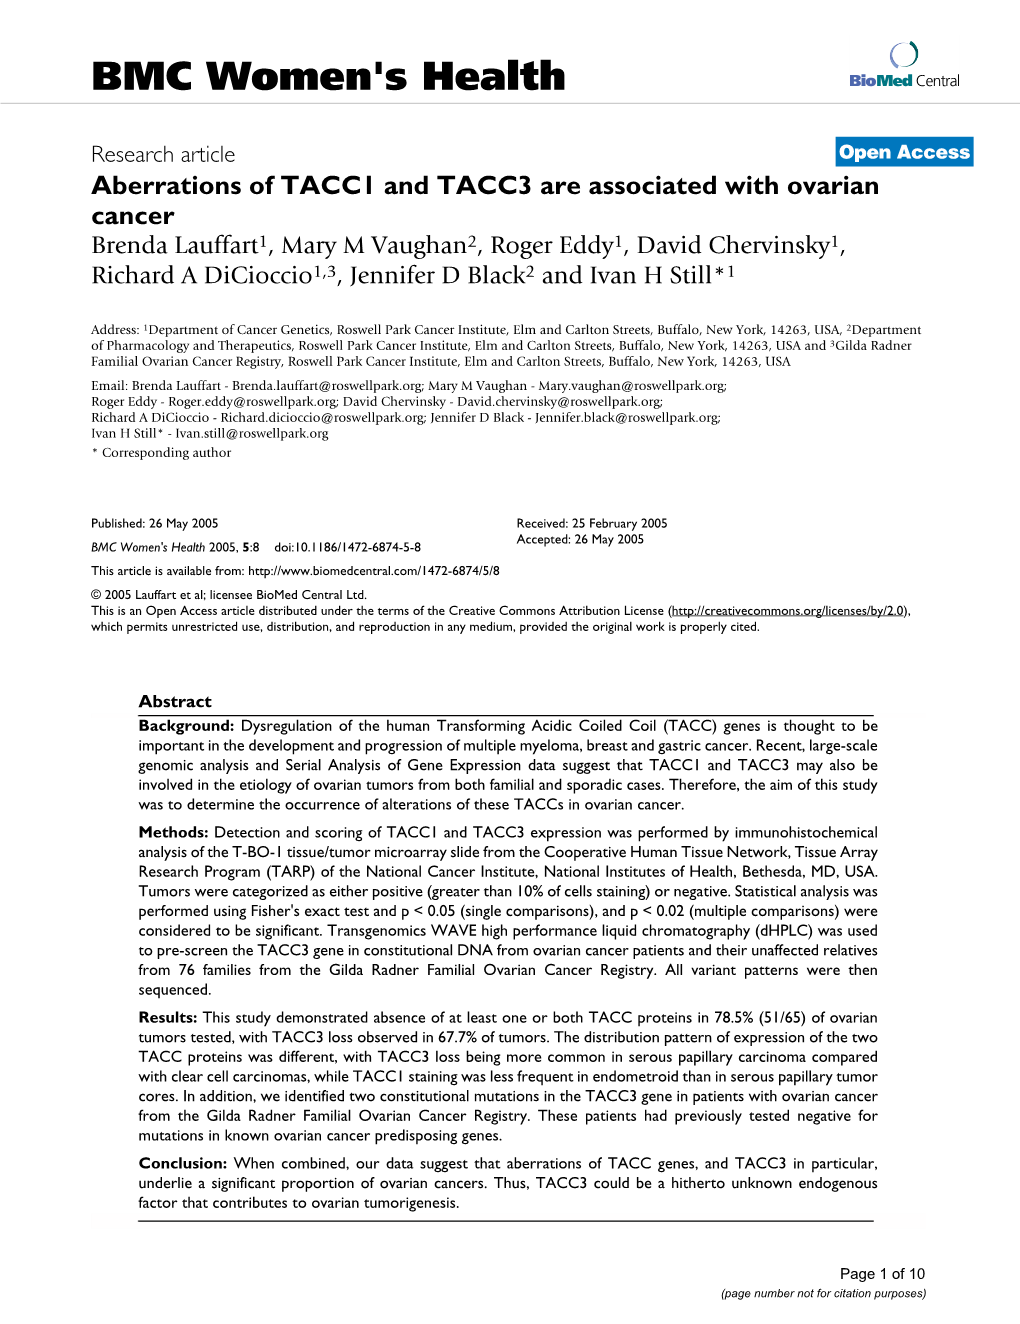 Aberrations of TACC1 and TACC3 Are Associated with Ovarian Cancer